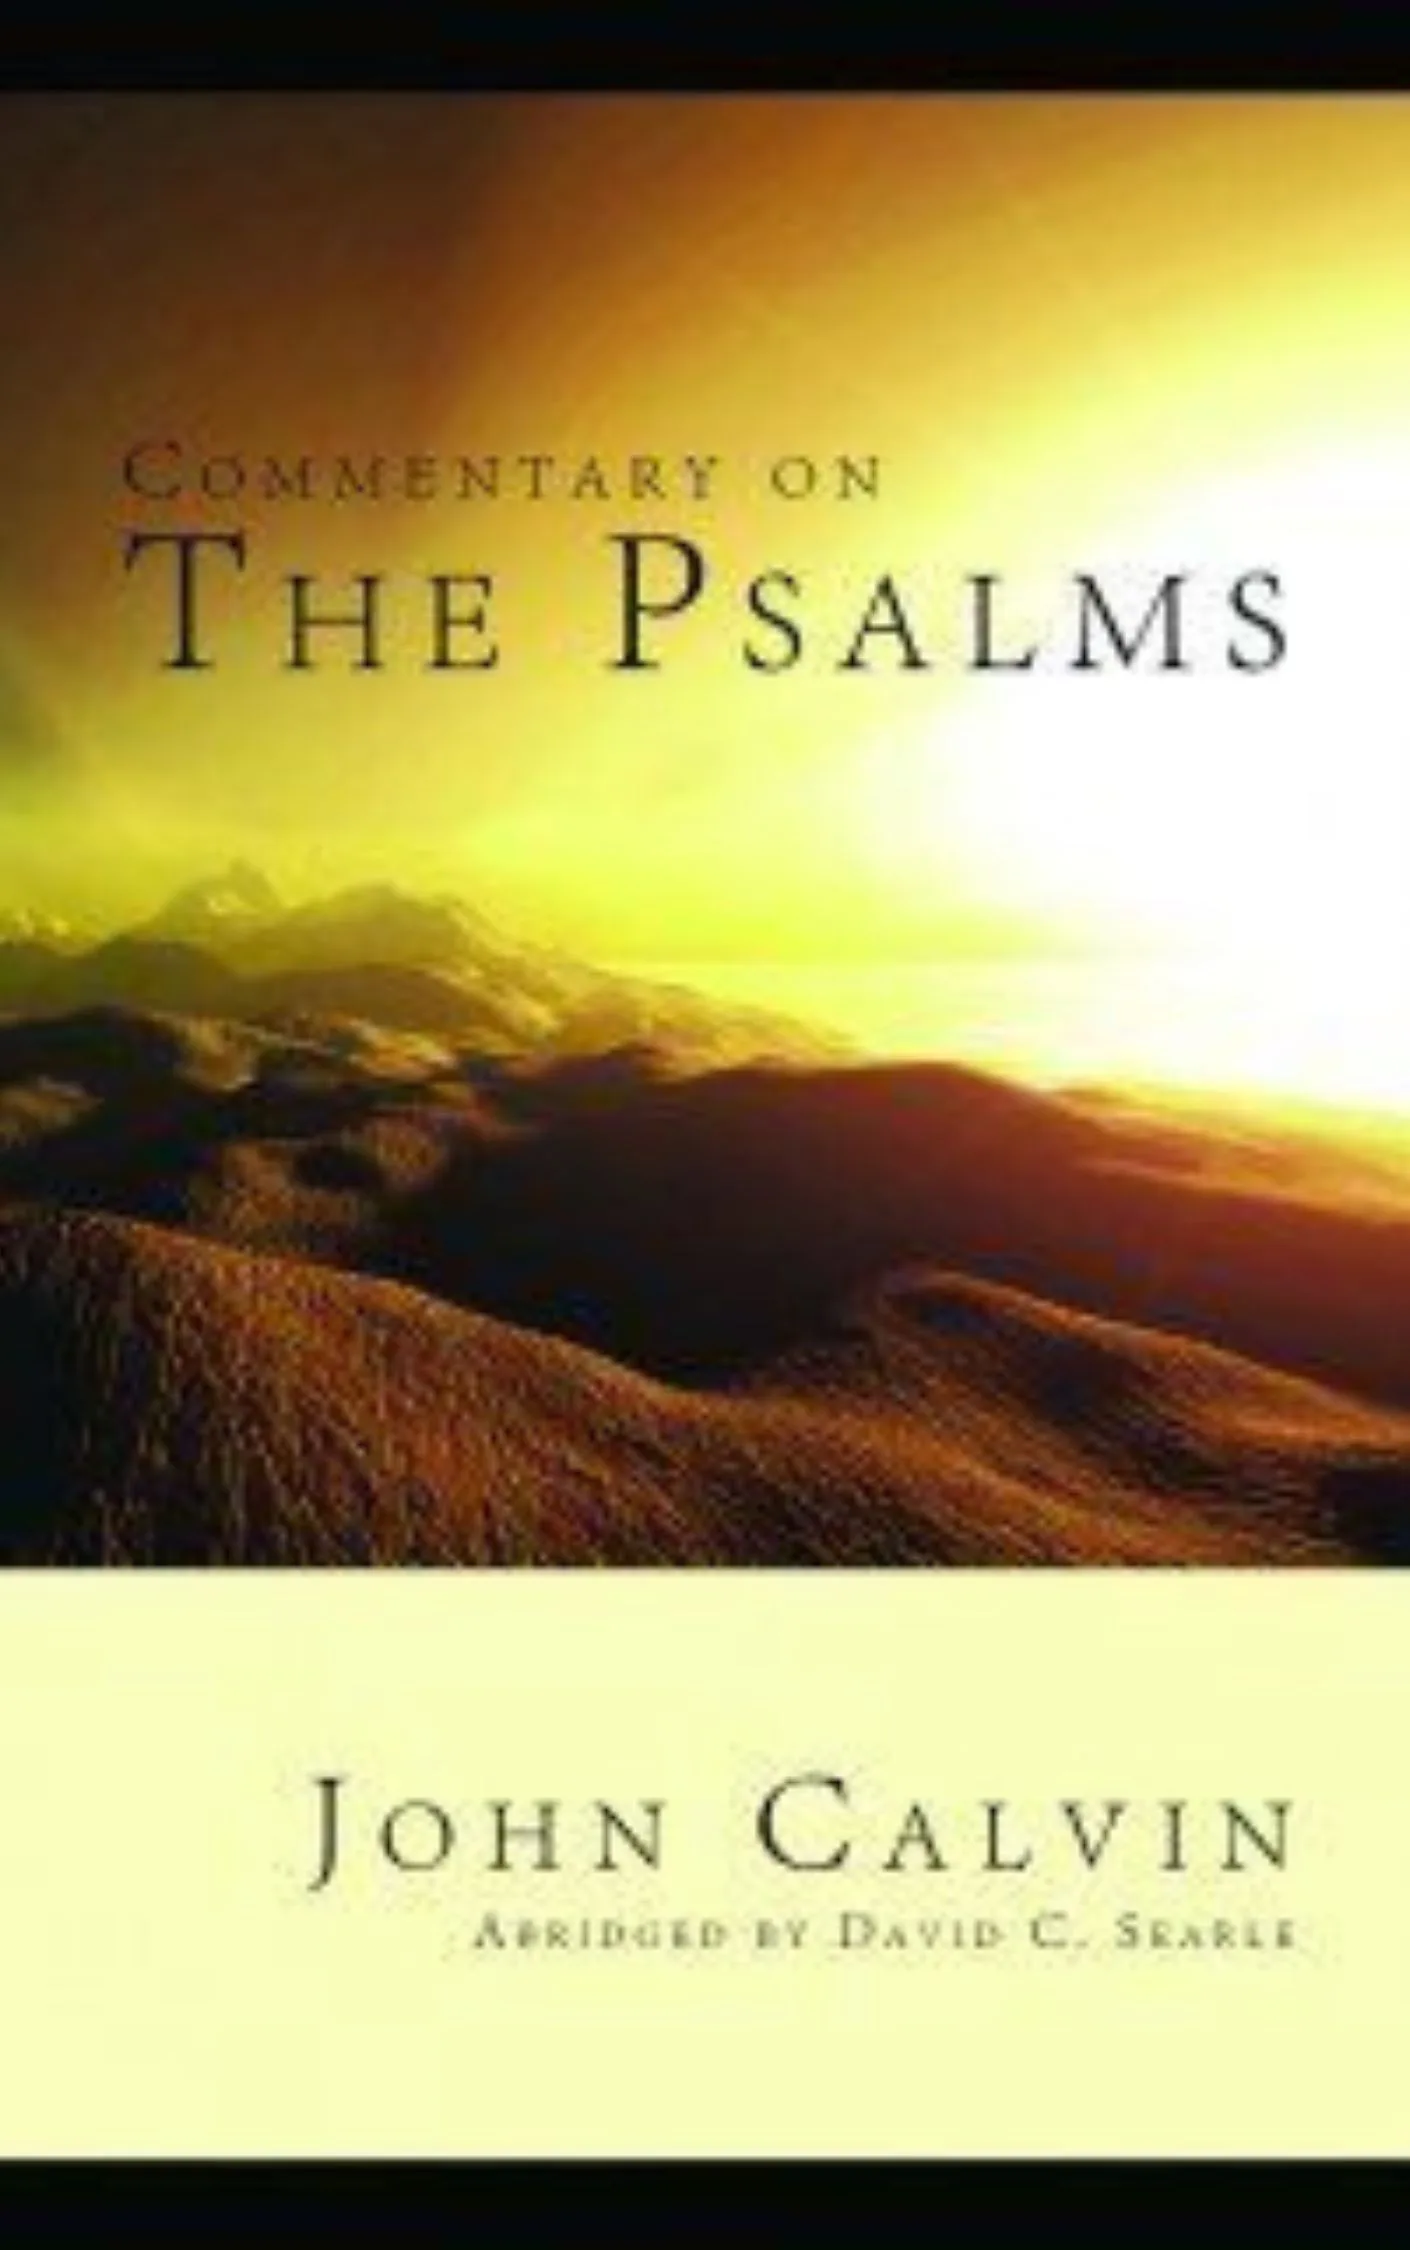 A Commentary Through the Psalms by John Calvin